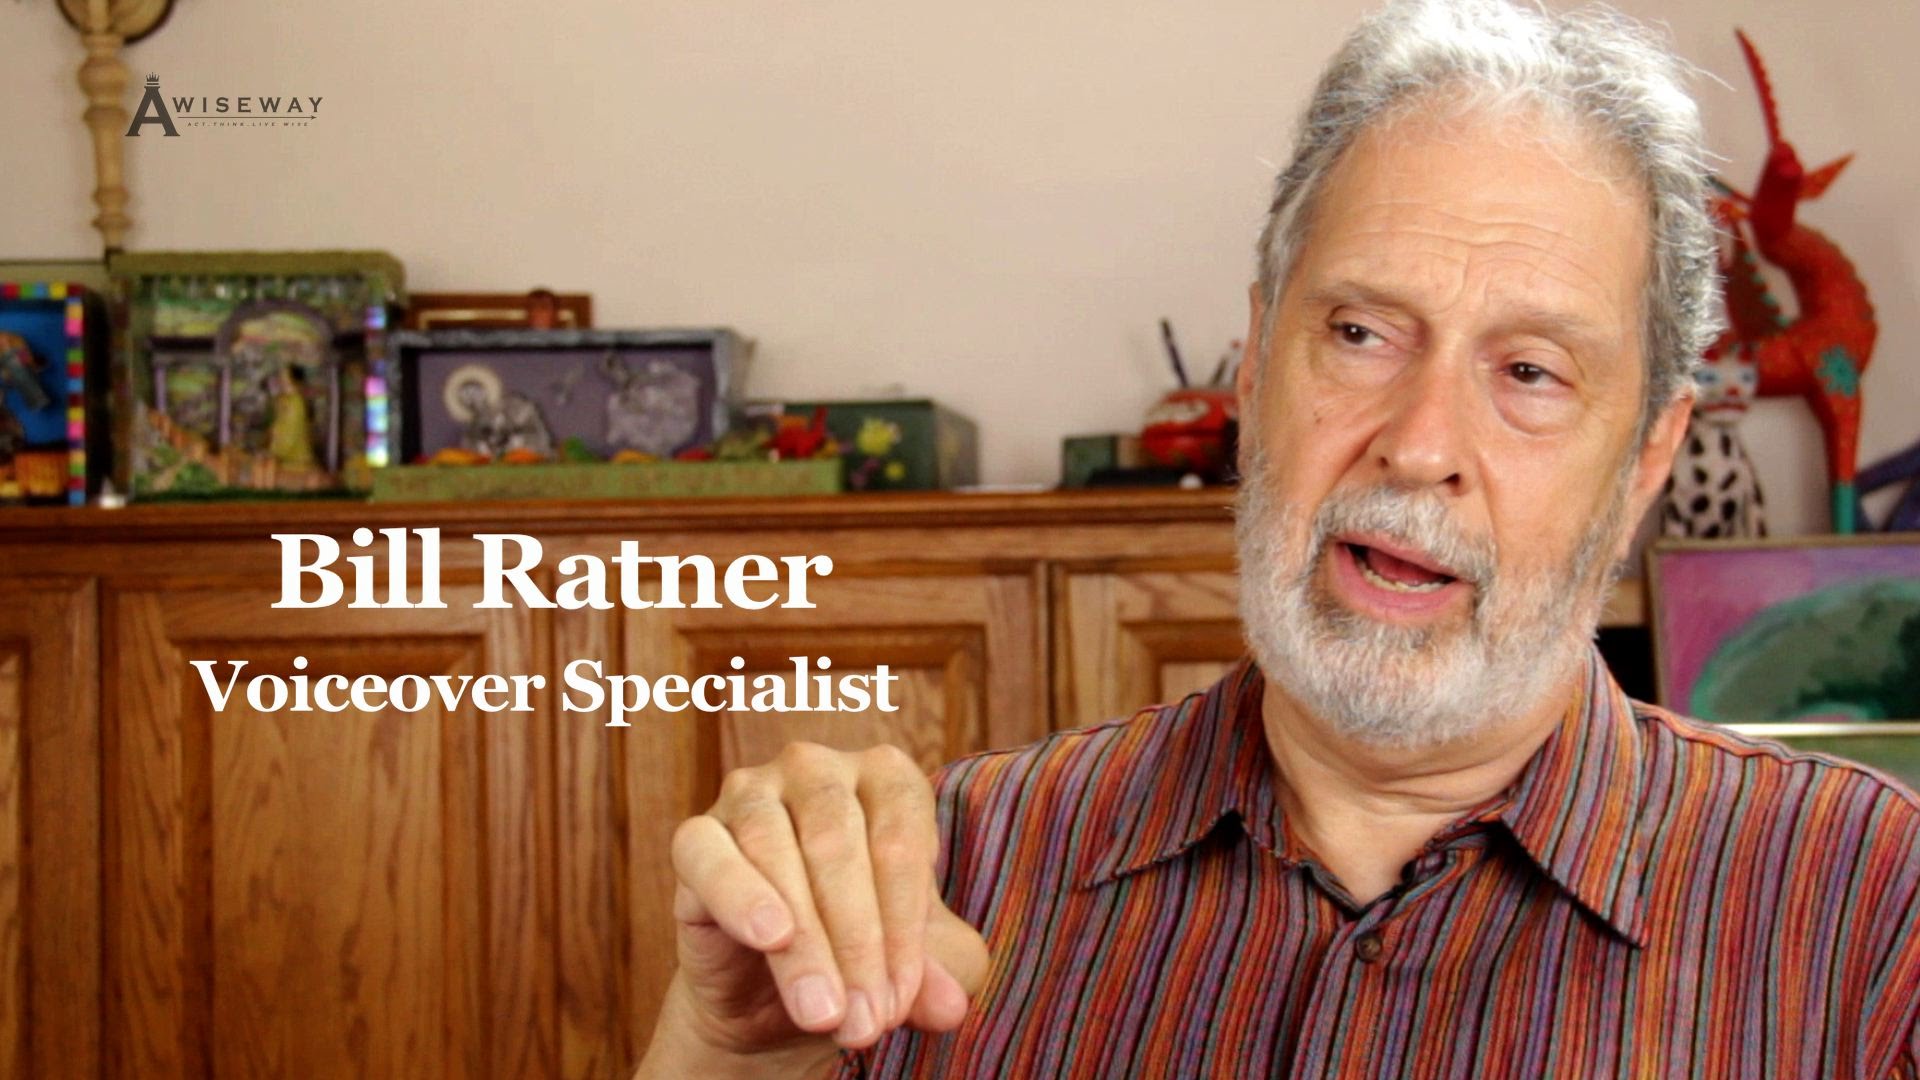 Voiceover Specialist Bill Ratner Speaks on the Pros and Cons of his Career